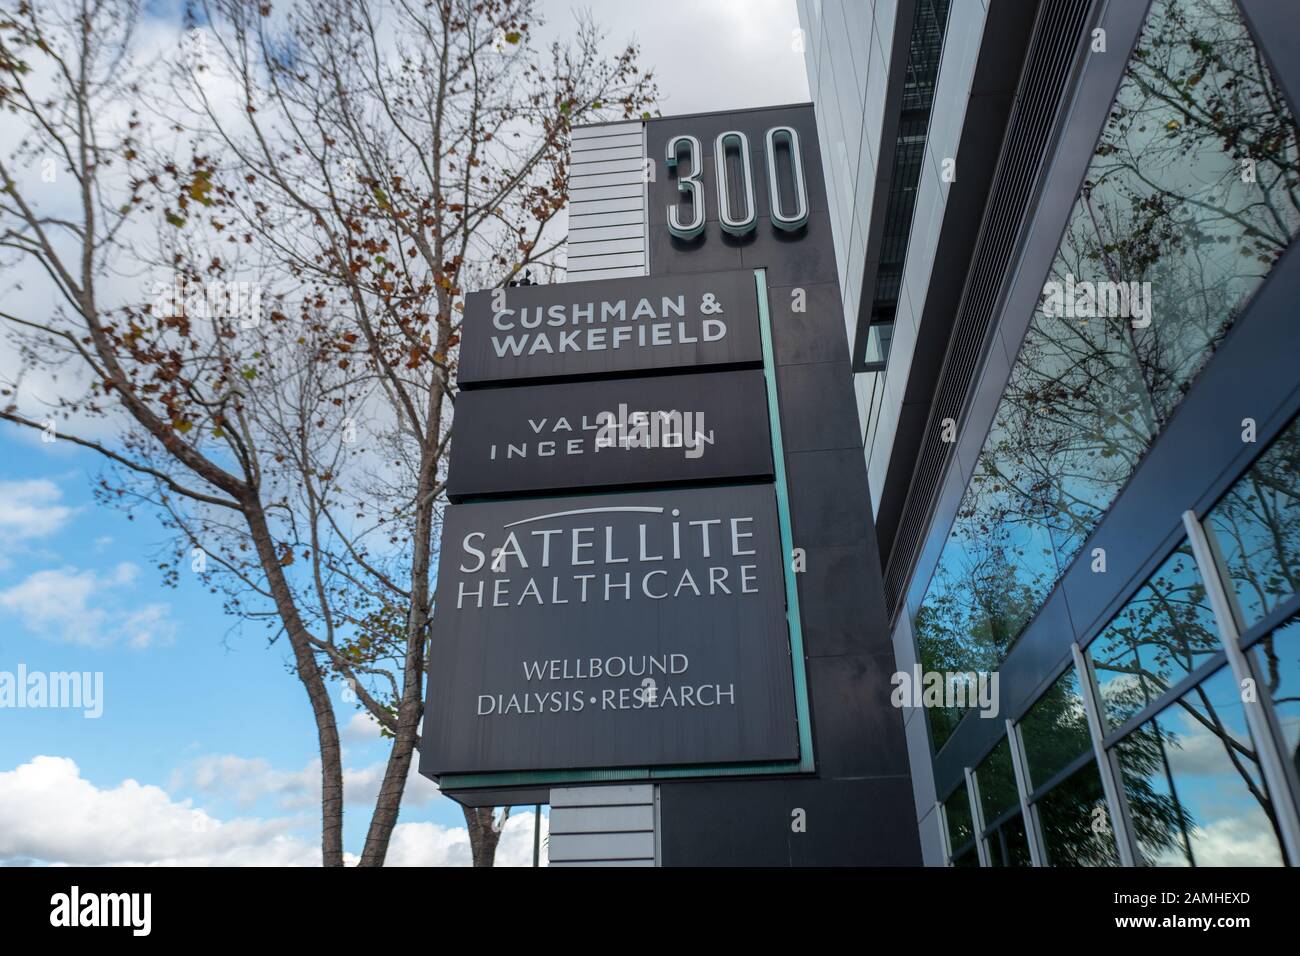 Sign with logos for businesses including Cushman and Wakefield, Valley Inception, Satellite Healthcare and Wellbound Dialysis Research on Santana Row in the Silicon Valley, San Jose, California, December 14, 2019. () Stock Photo